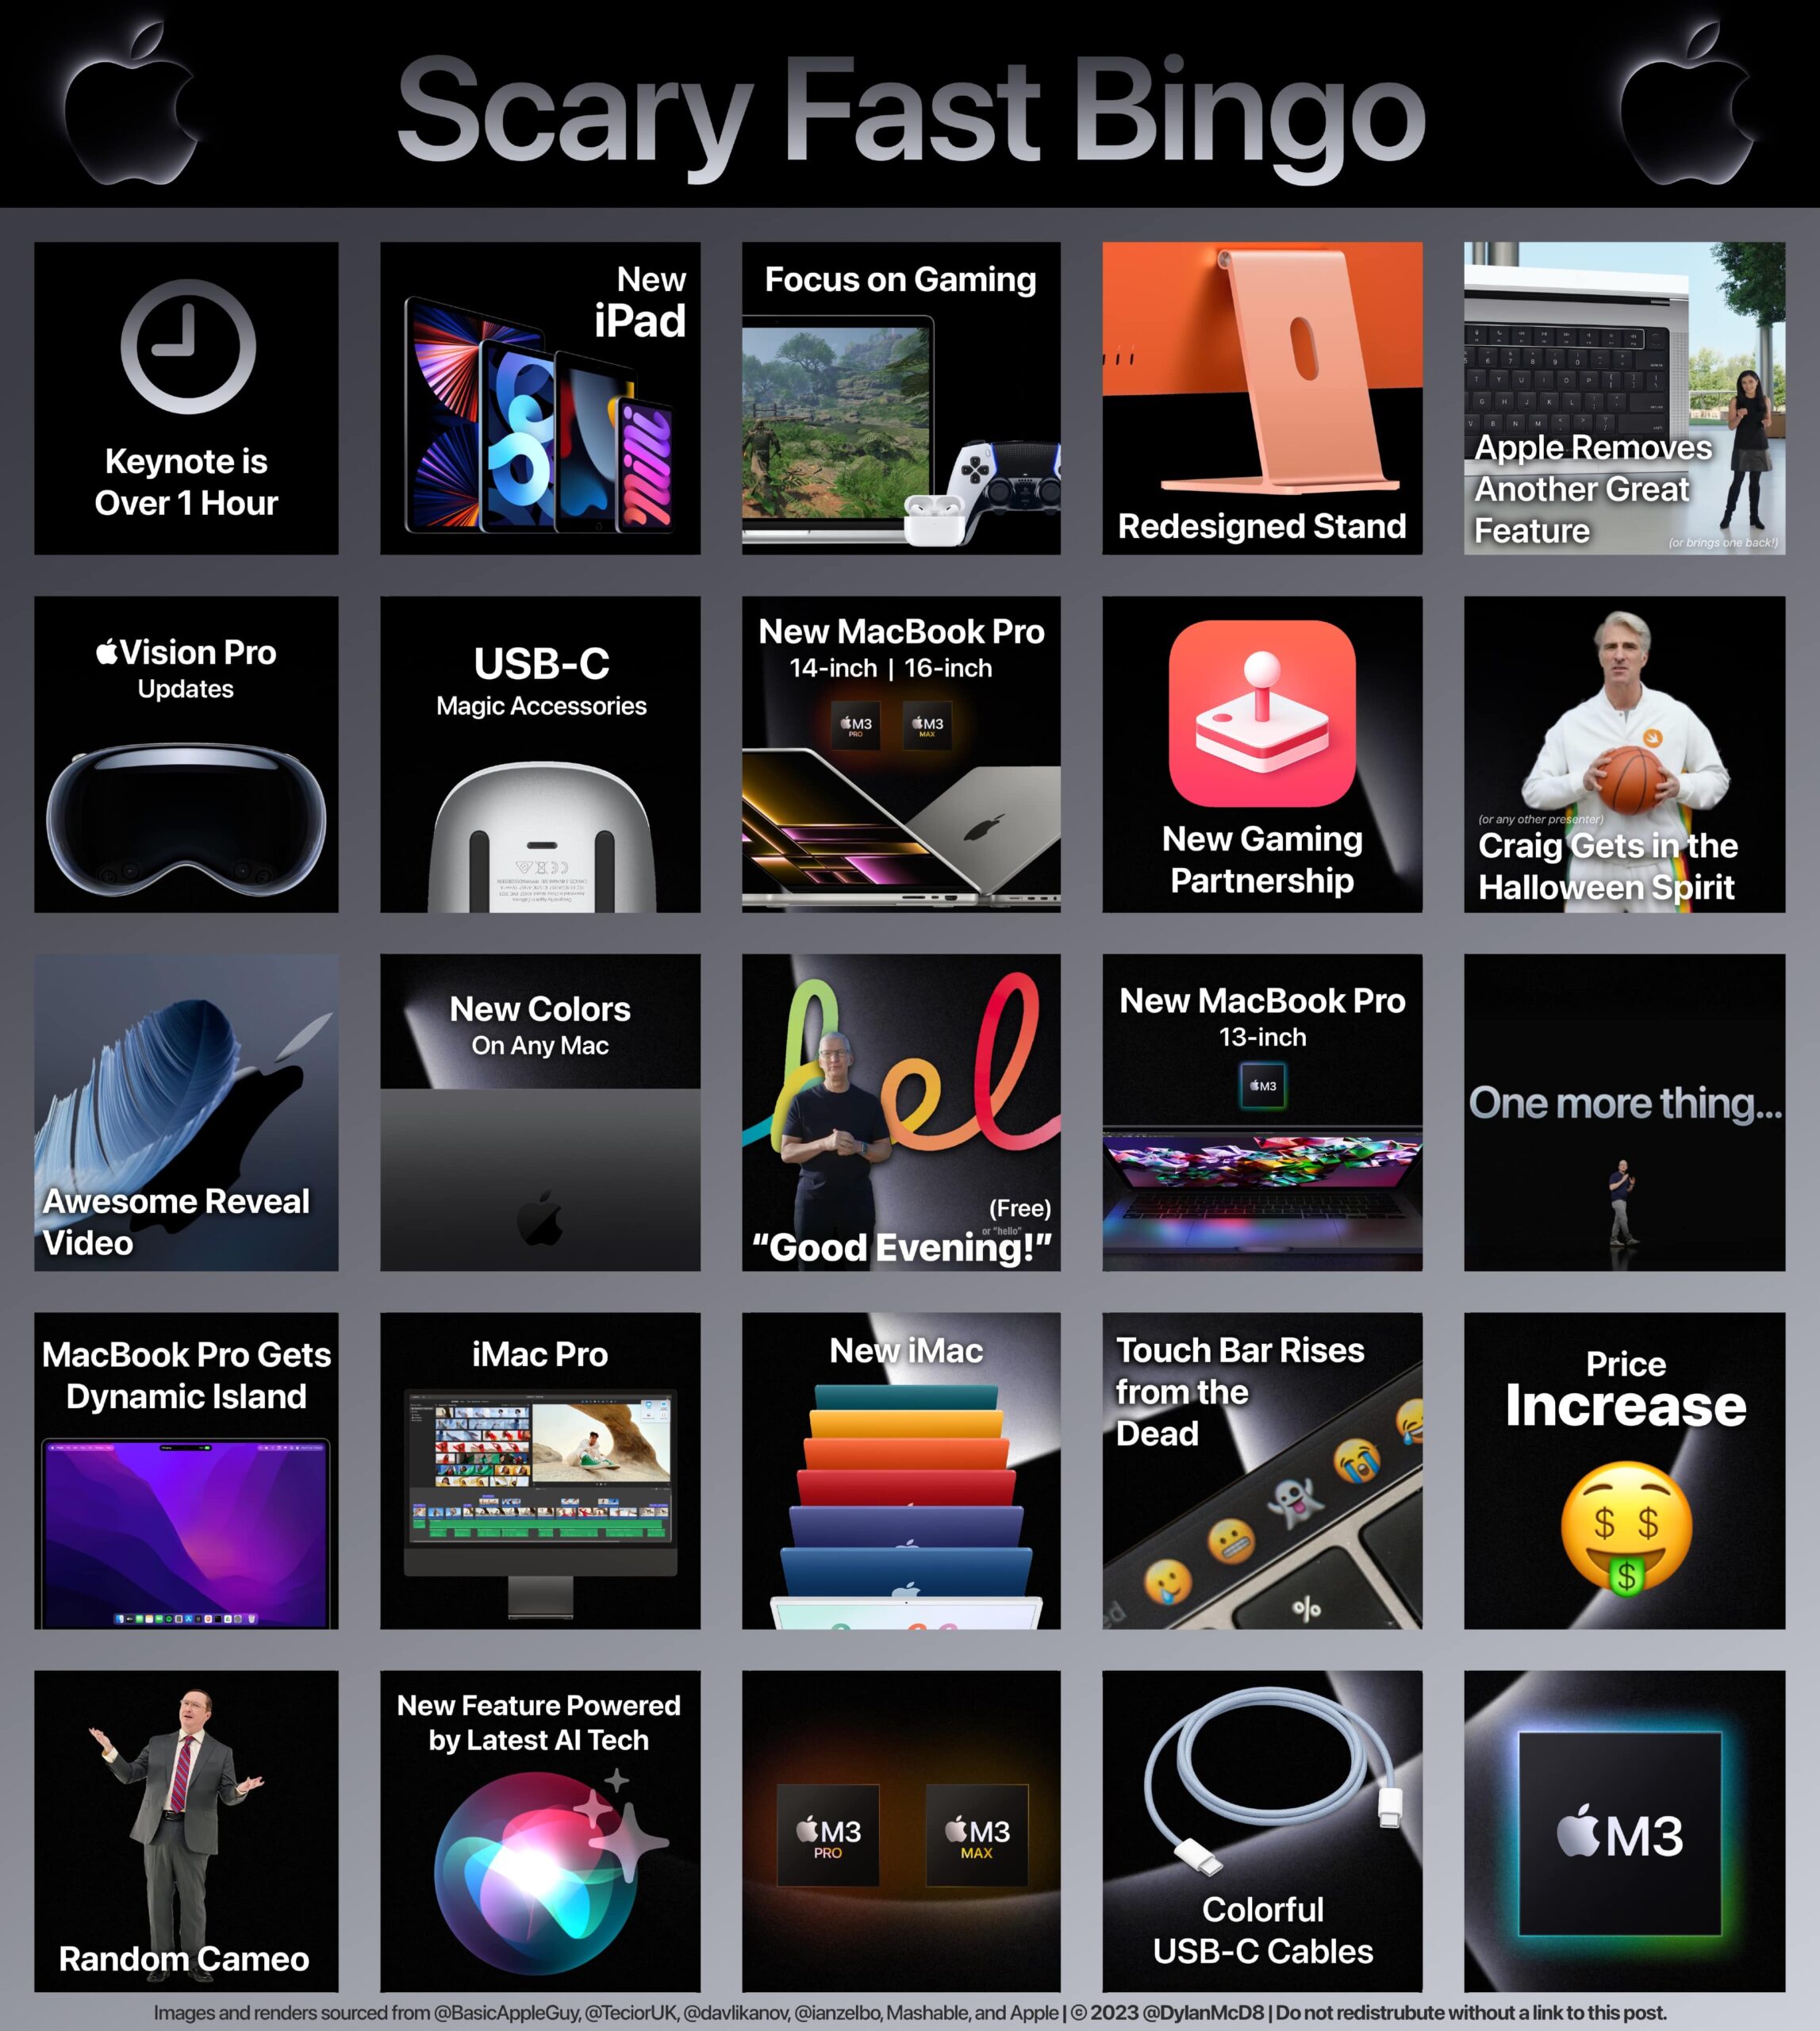 Get ready to play Scary Fast event bingo